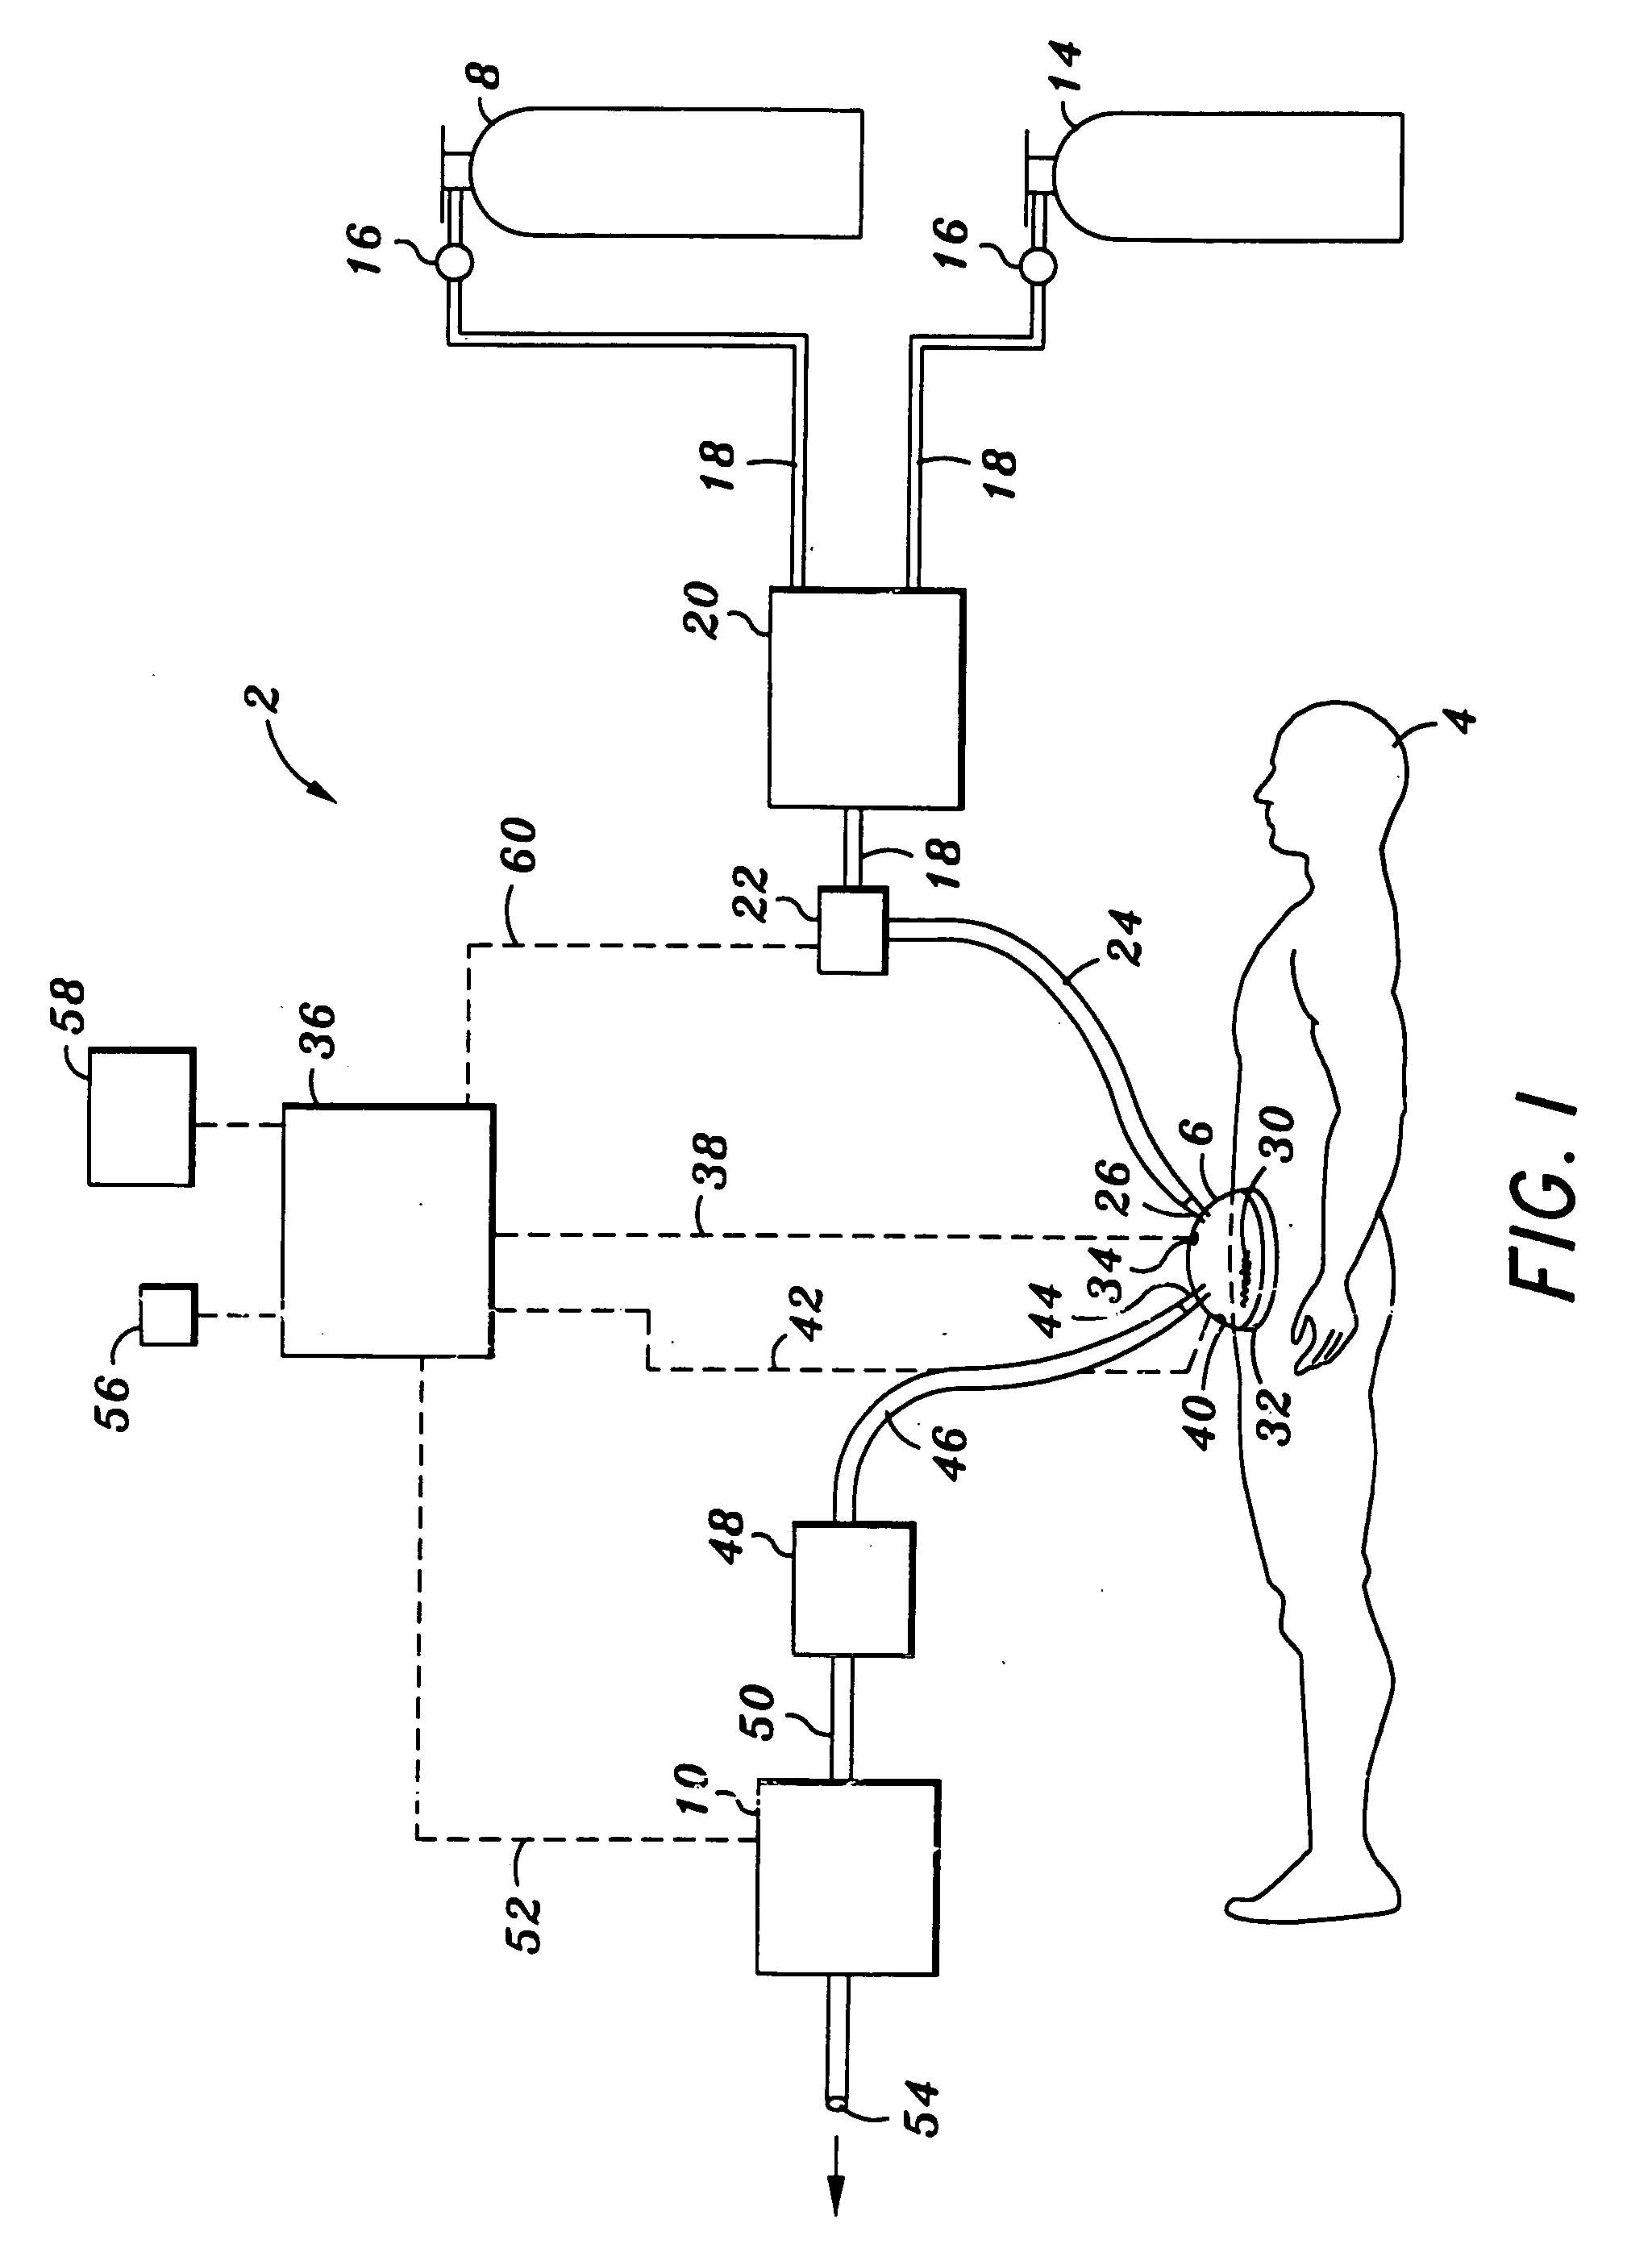 Device and method for treatment of surface infections with nitric oxide